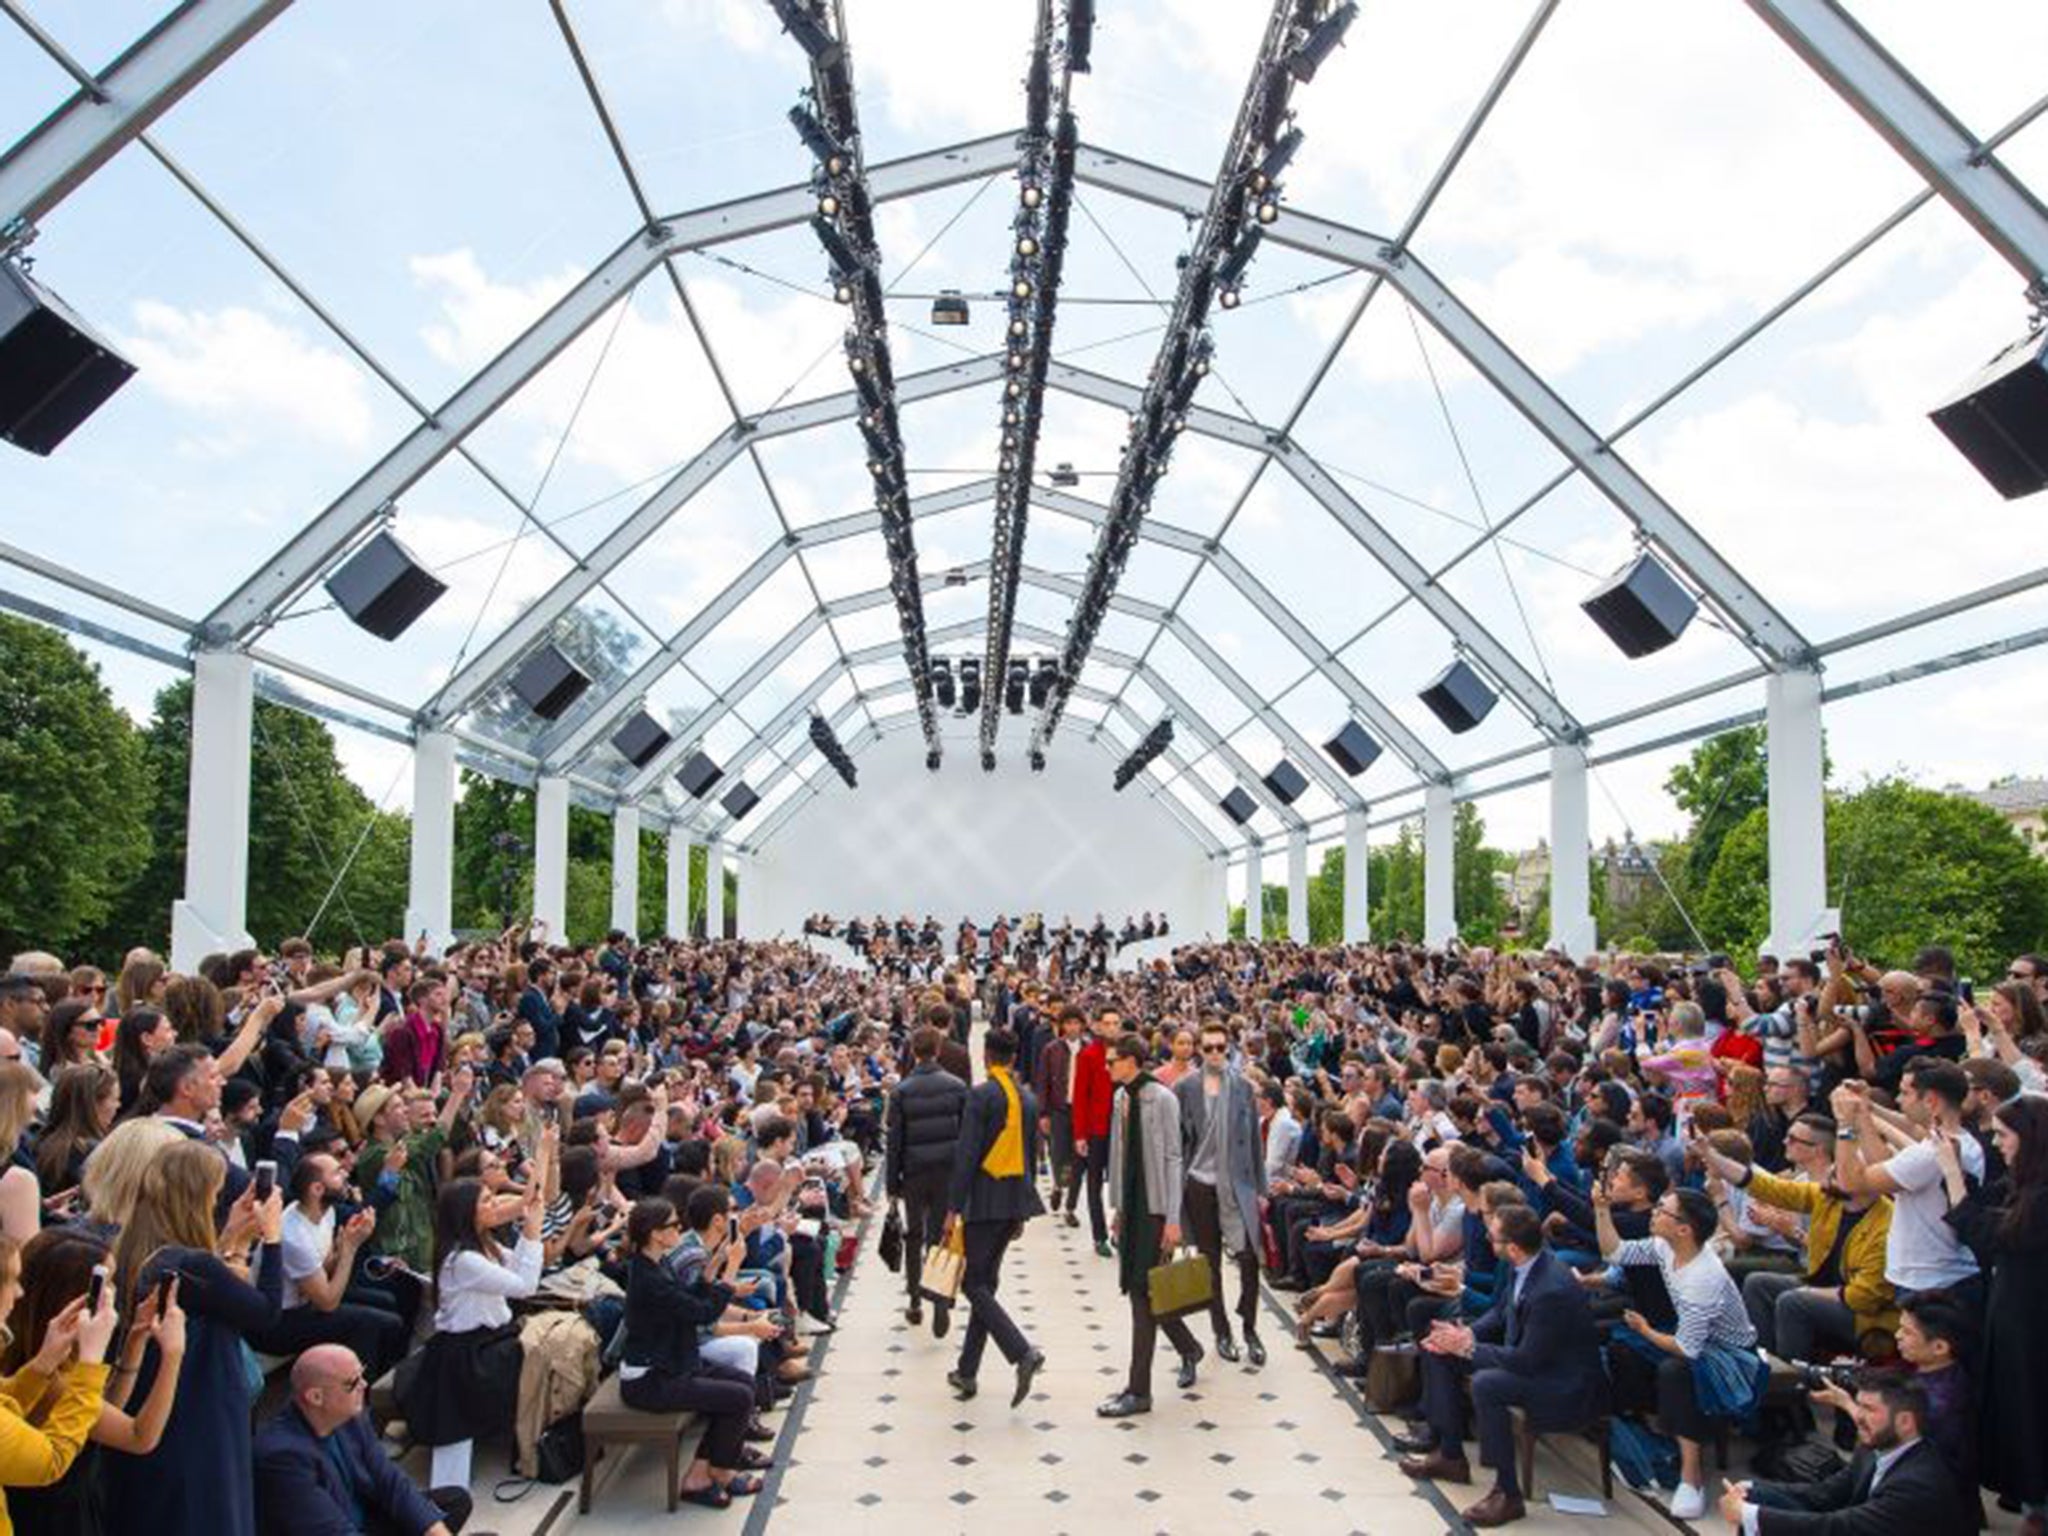 Burberry Prorsum men’s show in London brought Christopher Bailey’s vision to life